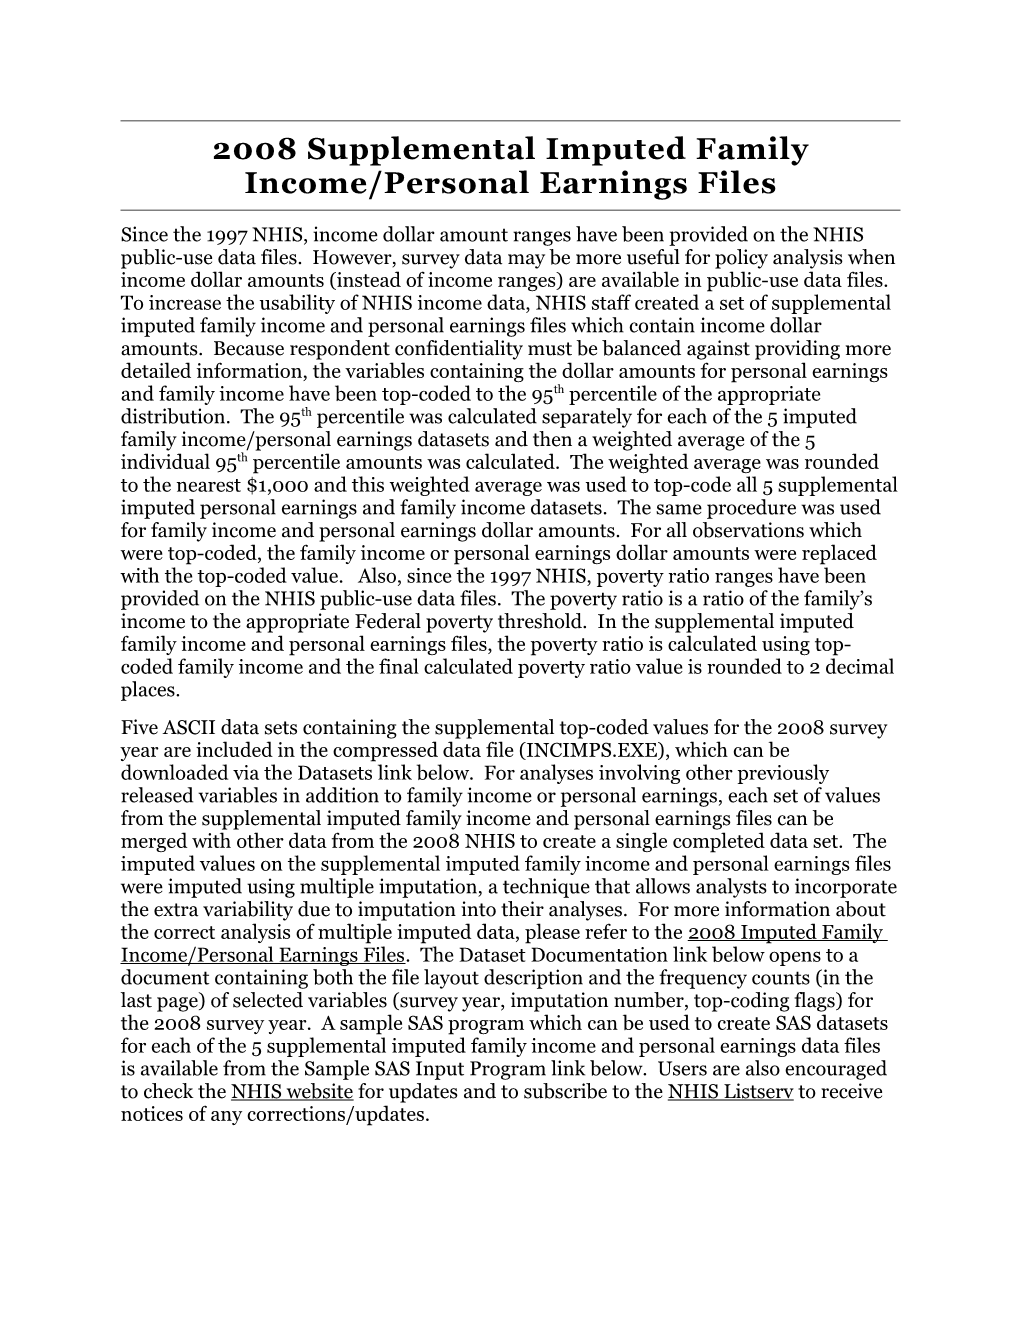 2008 Supplemental Imputed Family Income/Personal Earnings Files